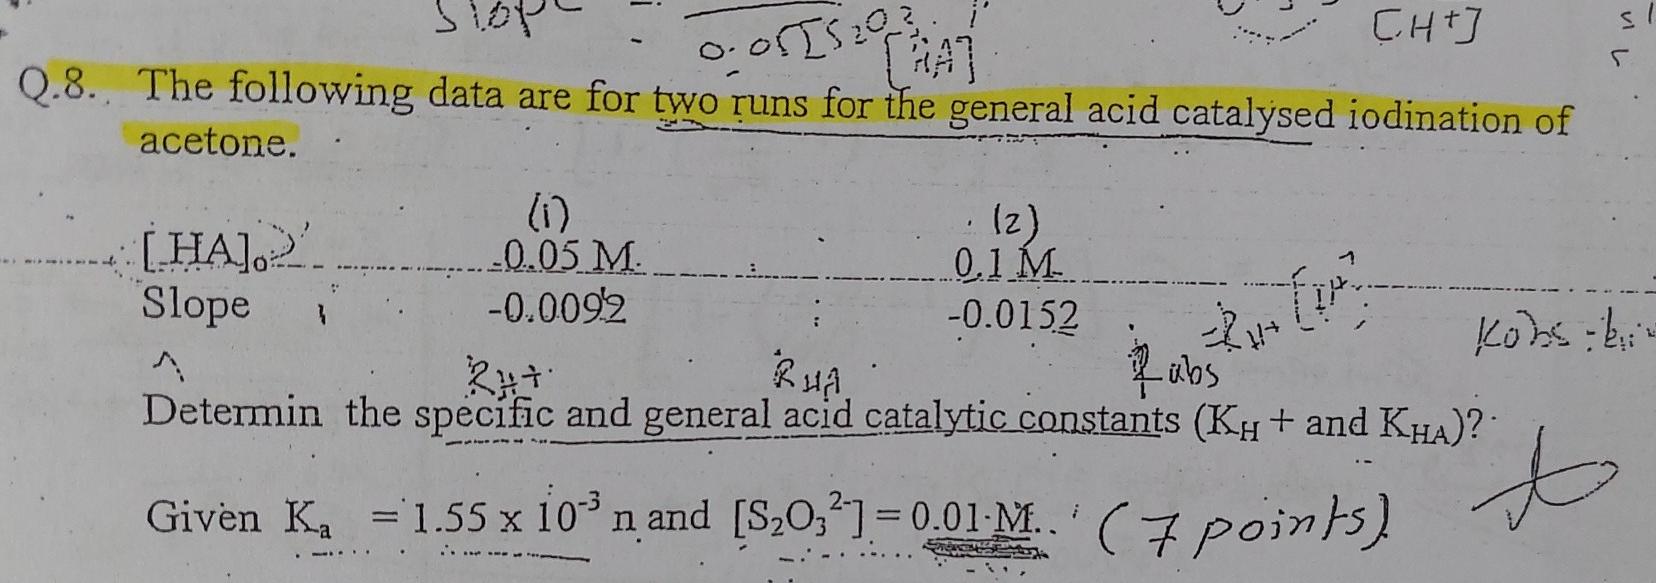 of[5203 VIL slop CH+ PA Q.8. The following data are for two runs for the general acid catalysed iodination of acetone. (1) ? 